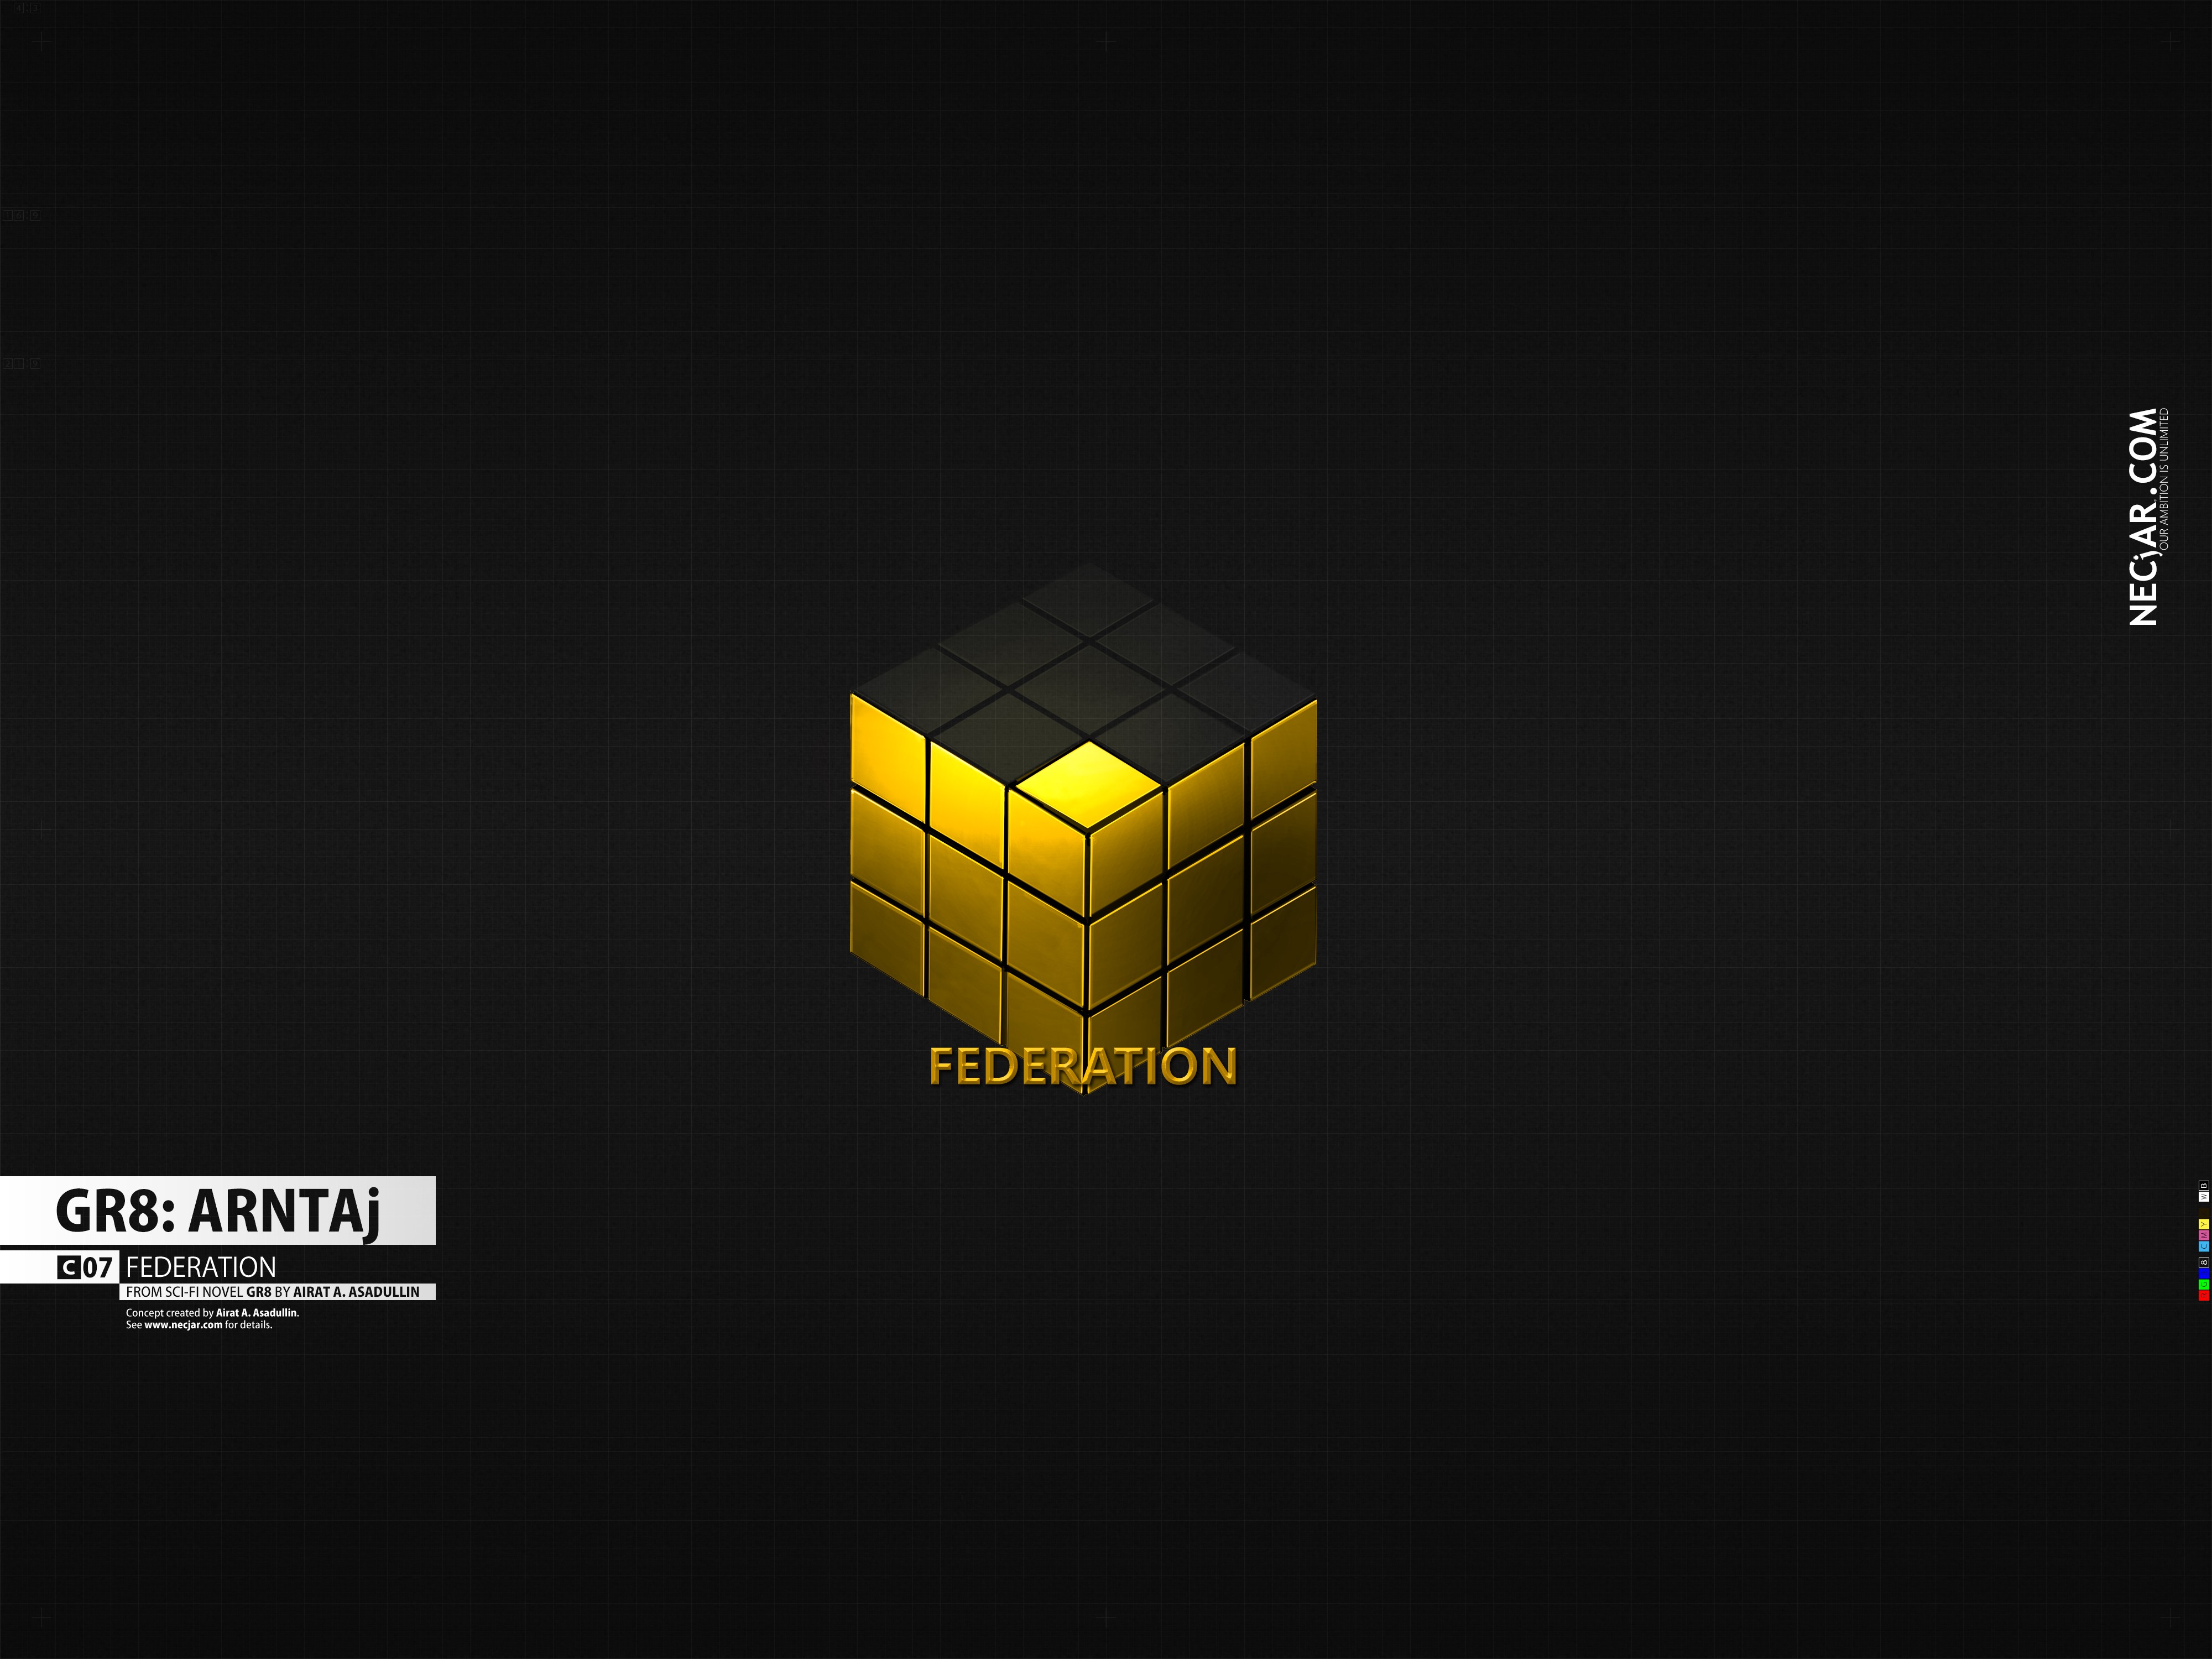 General 4000x3000 GR8 logo science fiction cube 3D blocks CGI simple background abstract 3D Abstract black background